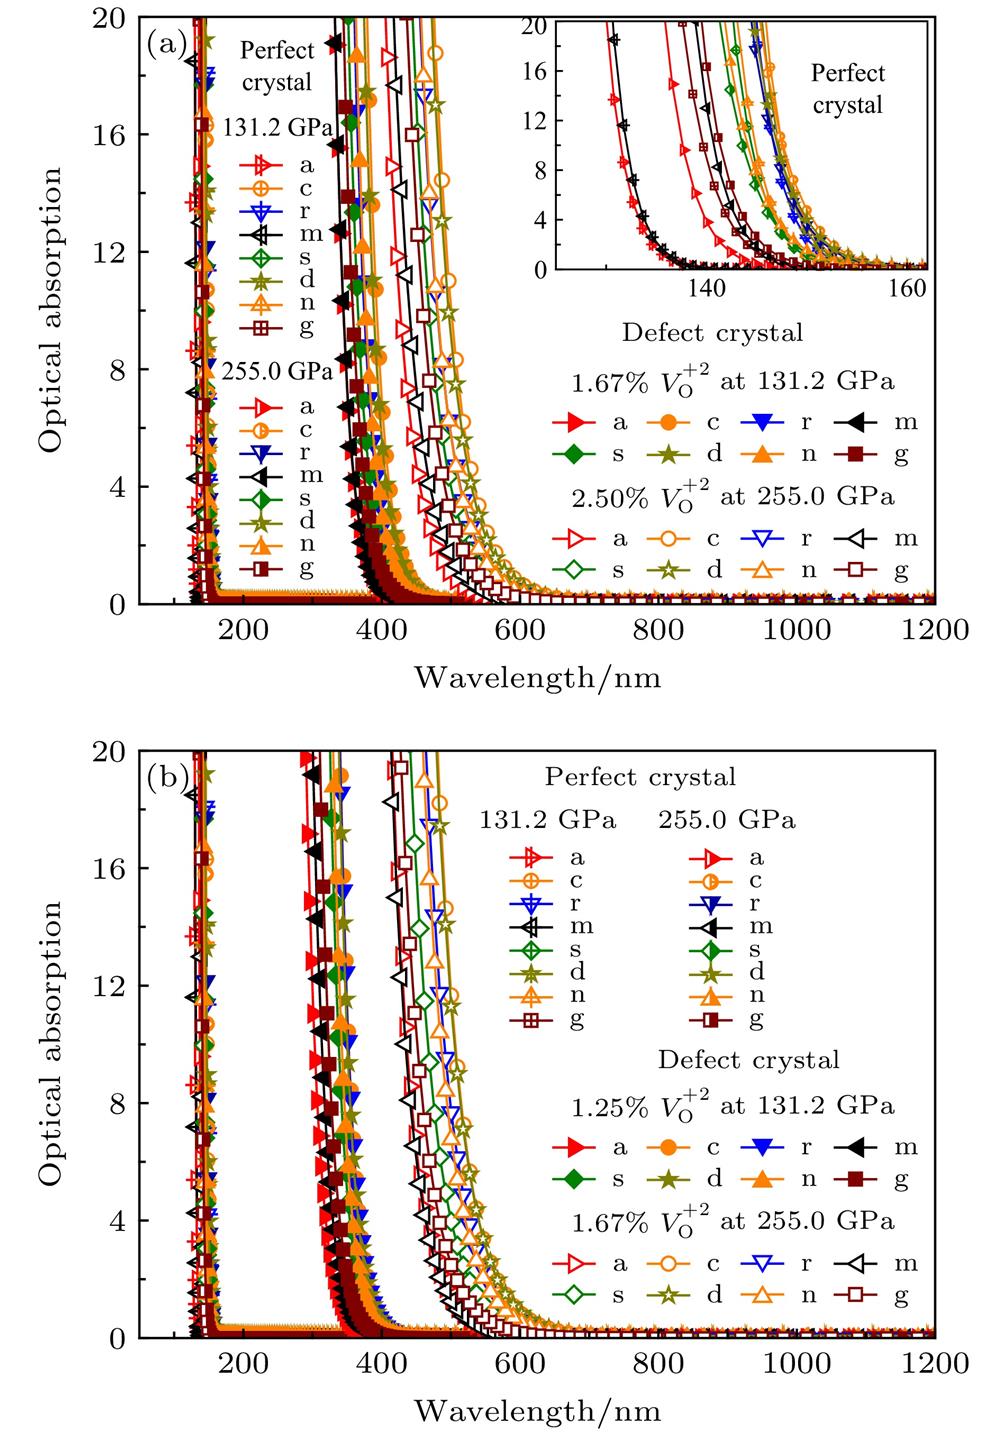 Shock-pressure dependence of the optical absorption spectra for CalrO3-Al2O3 with eight crystallographic orientations (a, c, d, r, n, s, g and m indicate a, c, d, r, n, s, g and m orientations, respectively. The calculated data have been corrected by shock temperature): (a) Data calculated with higher defective concentration model at 131.2 GPa and 255 GPa (the inserted figure shows perfect-crystal data); (b) data calculated with lower defective concentration model at 131.2 GPa and 255 GPa.